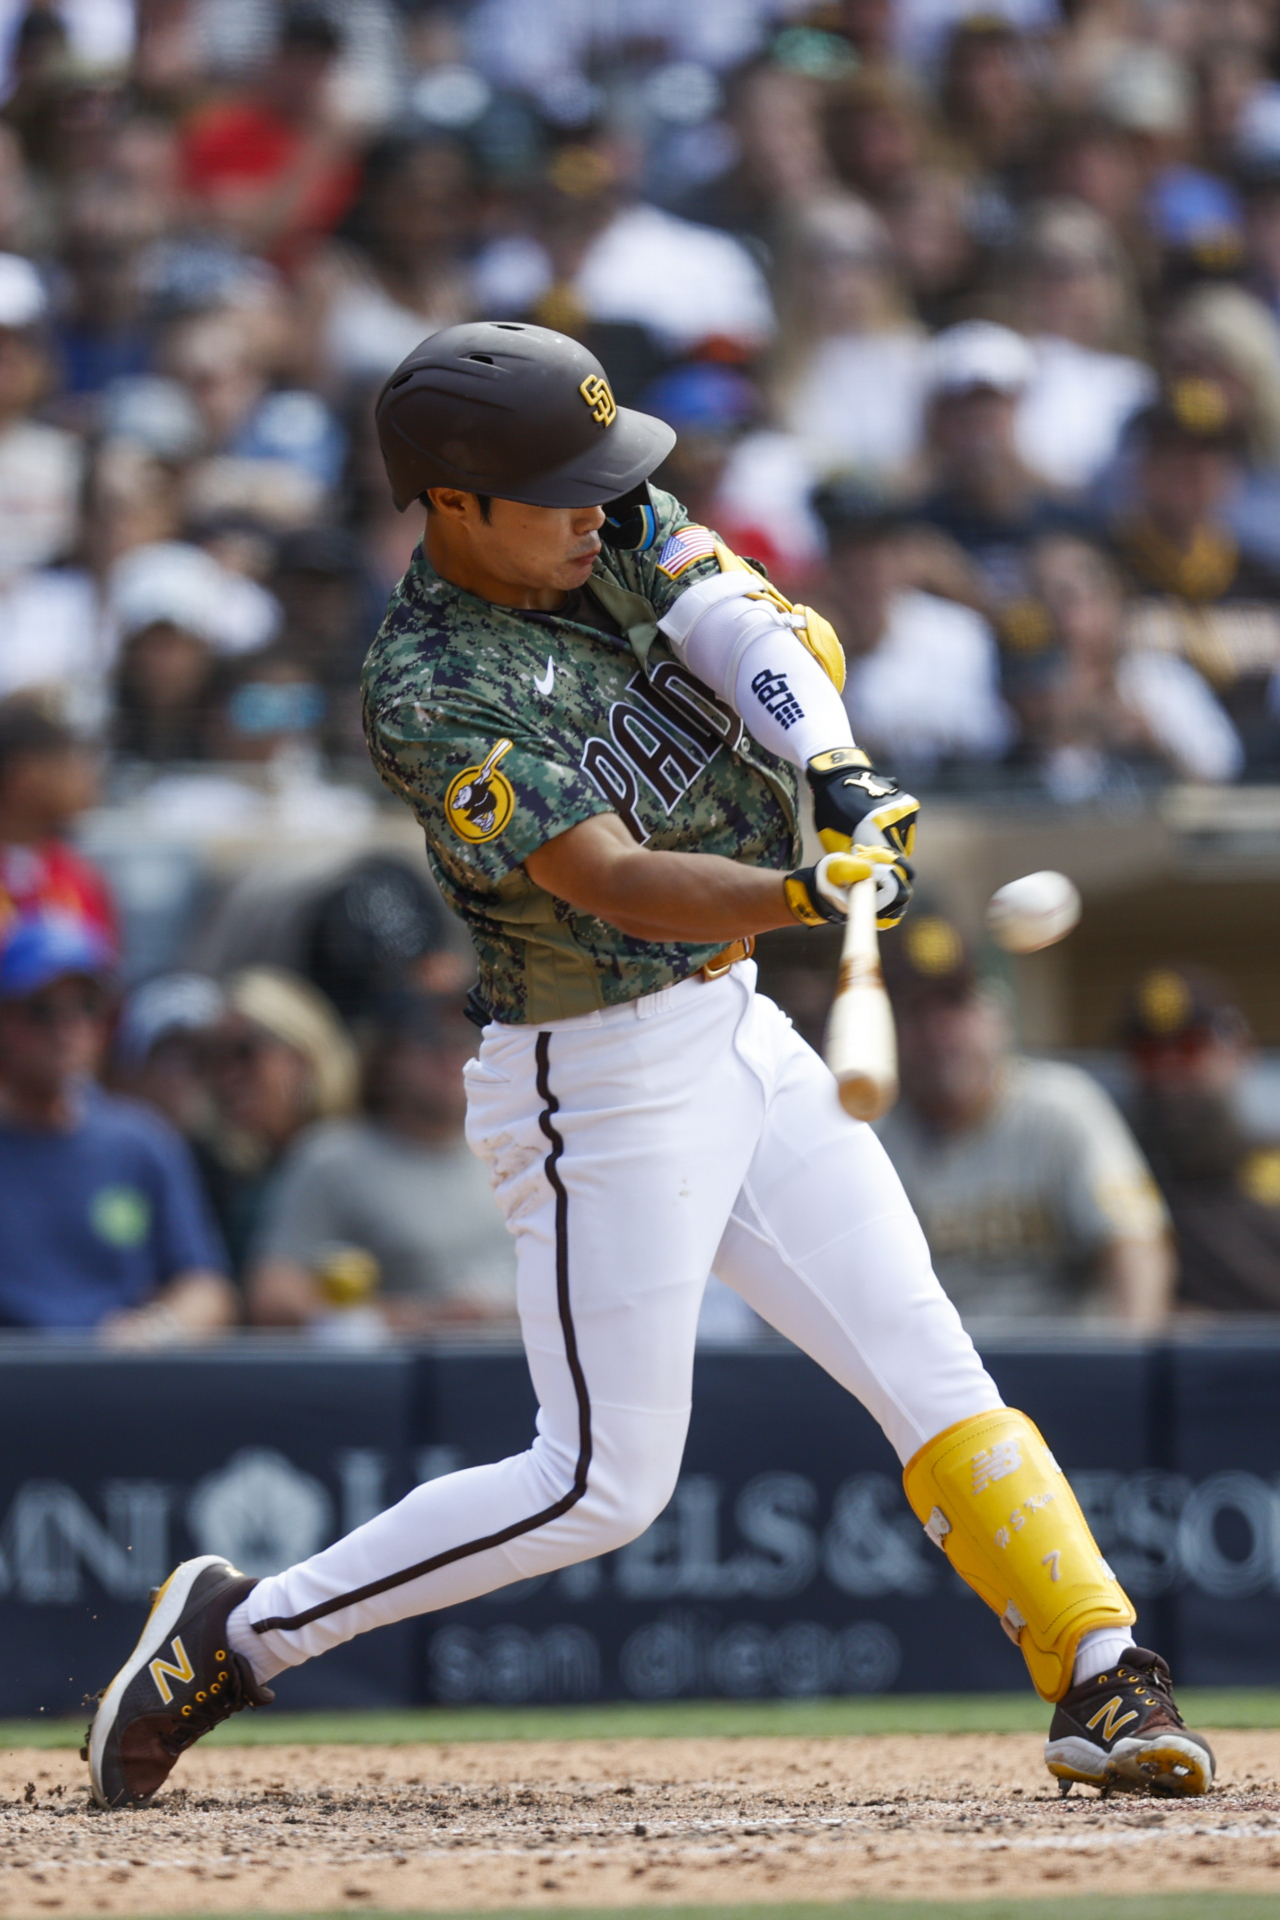 In this USA Today Sports photo via Reuters, Kim Ha-seong of the San Diego Padres hits a single against the Pittsburgh Pirates during the bottom of the eighth inning of a Major League Baseball regular season game at Petco Park in San Diego on Sunday. (Reuters)